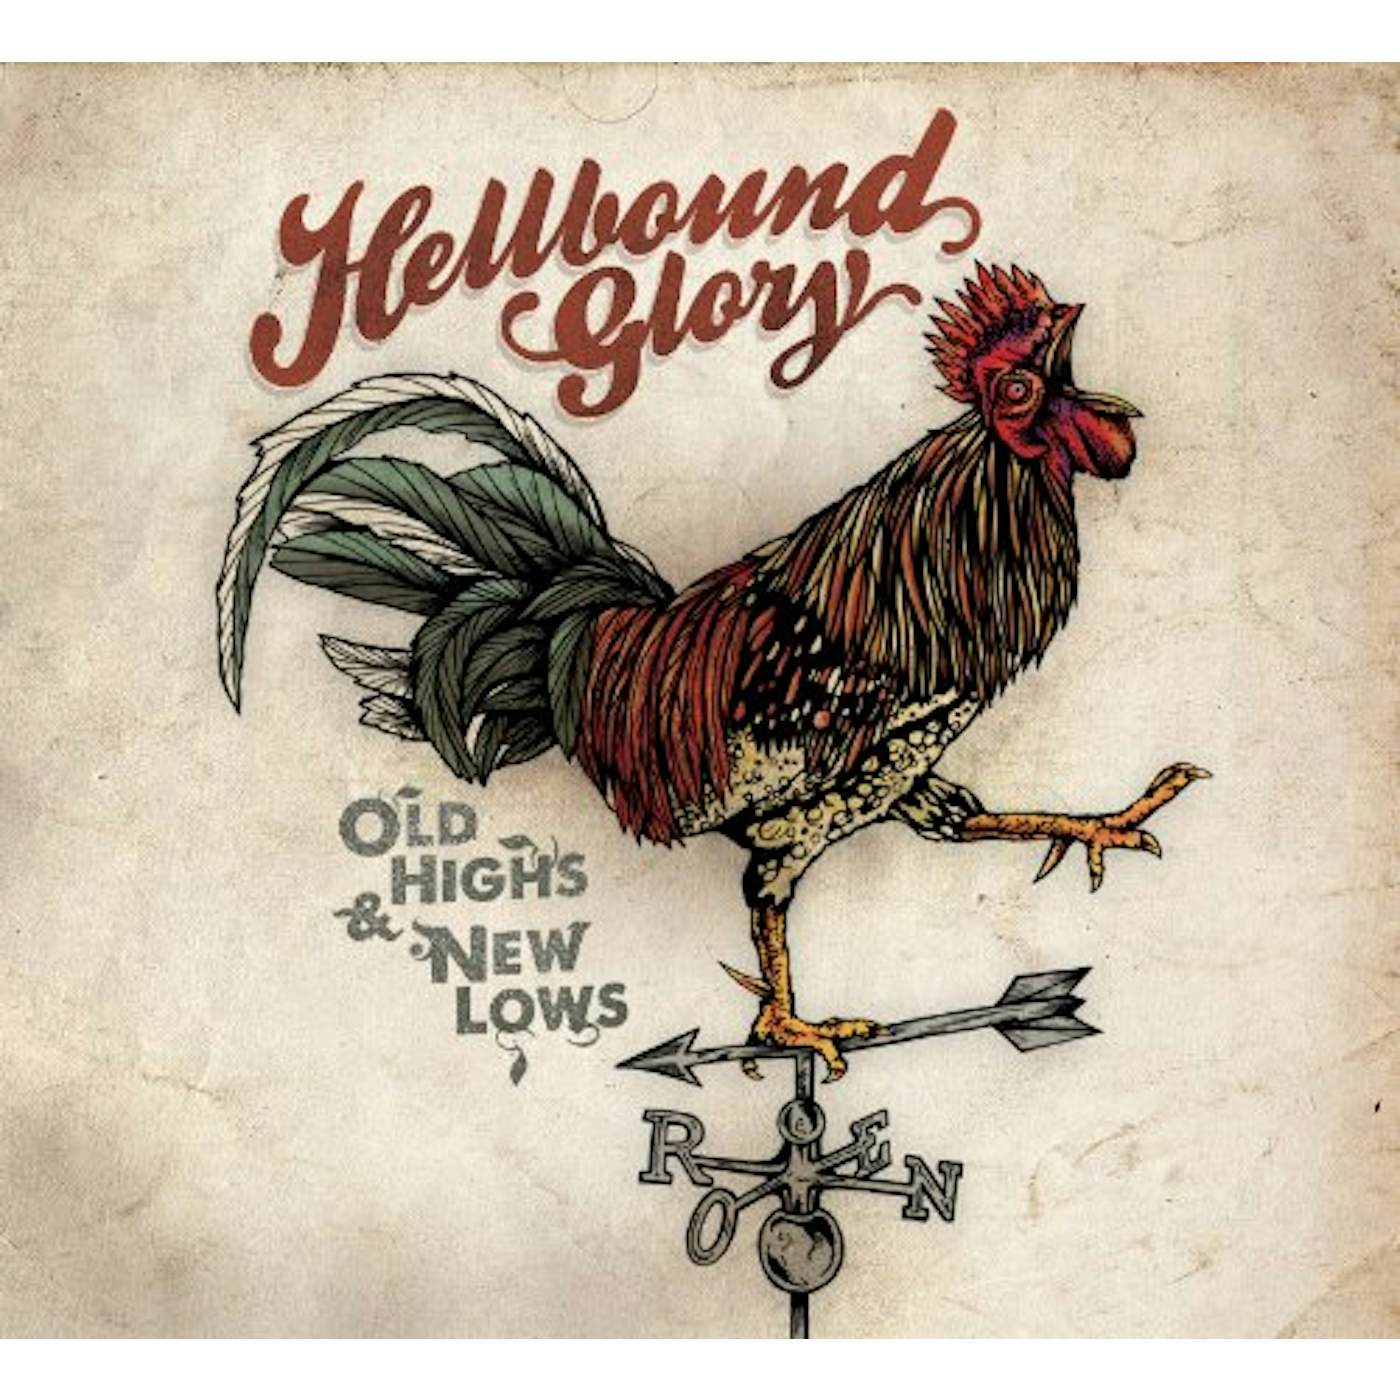 Hellbound Glory OLD HIGHS NEW LOWS CD